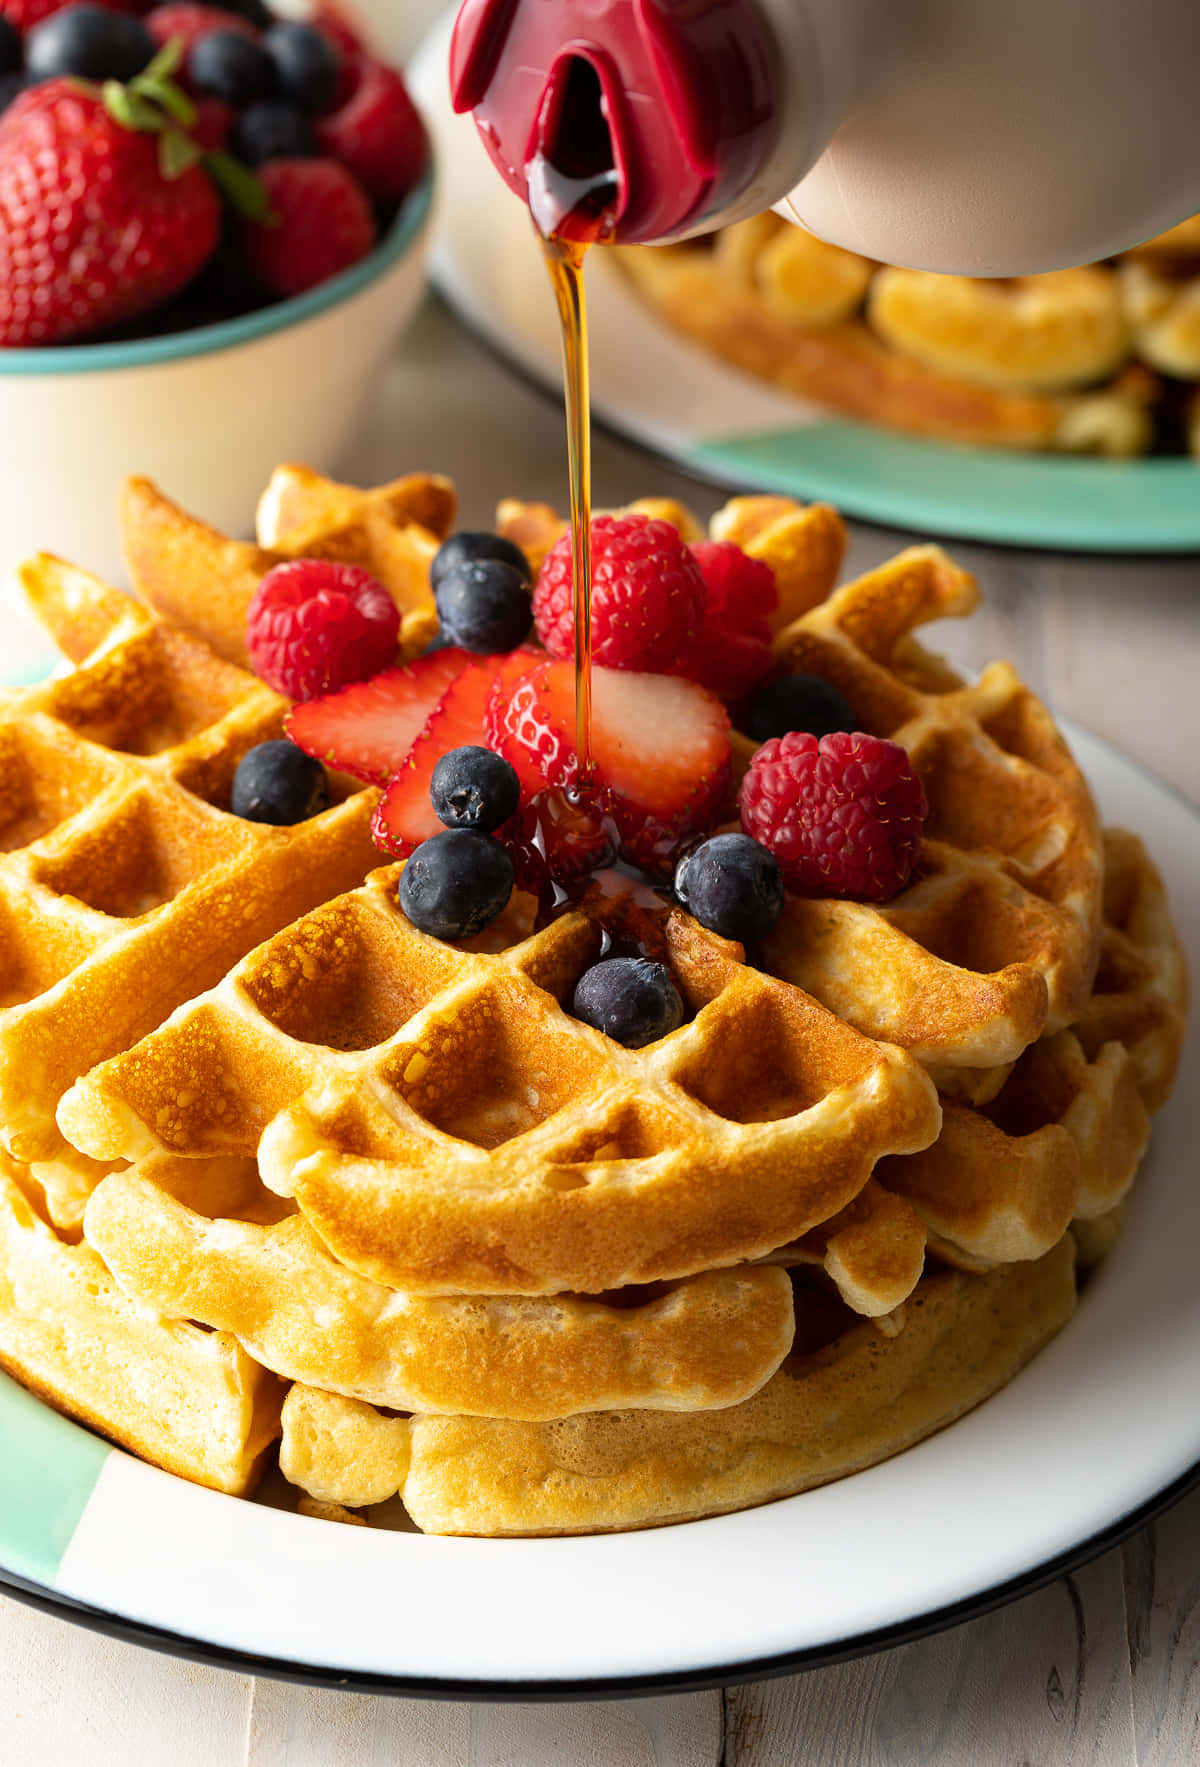 Start your day with a delicious and fluffy waffle!